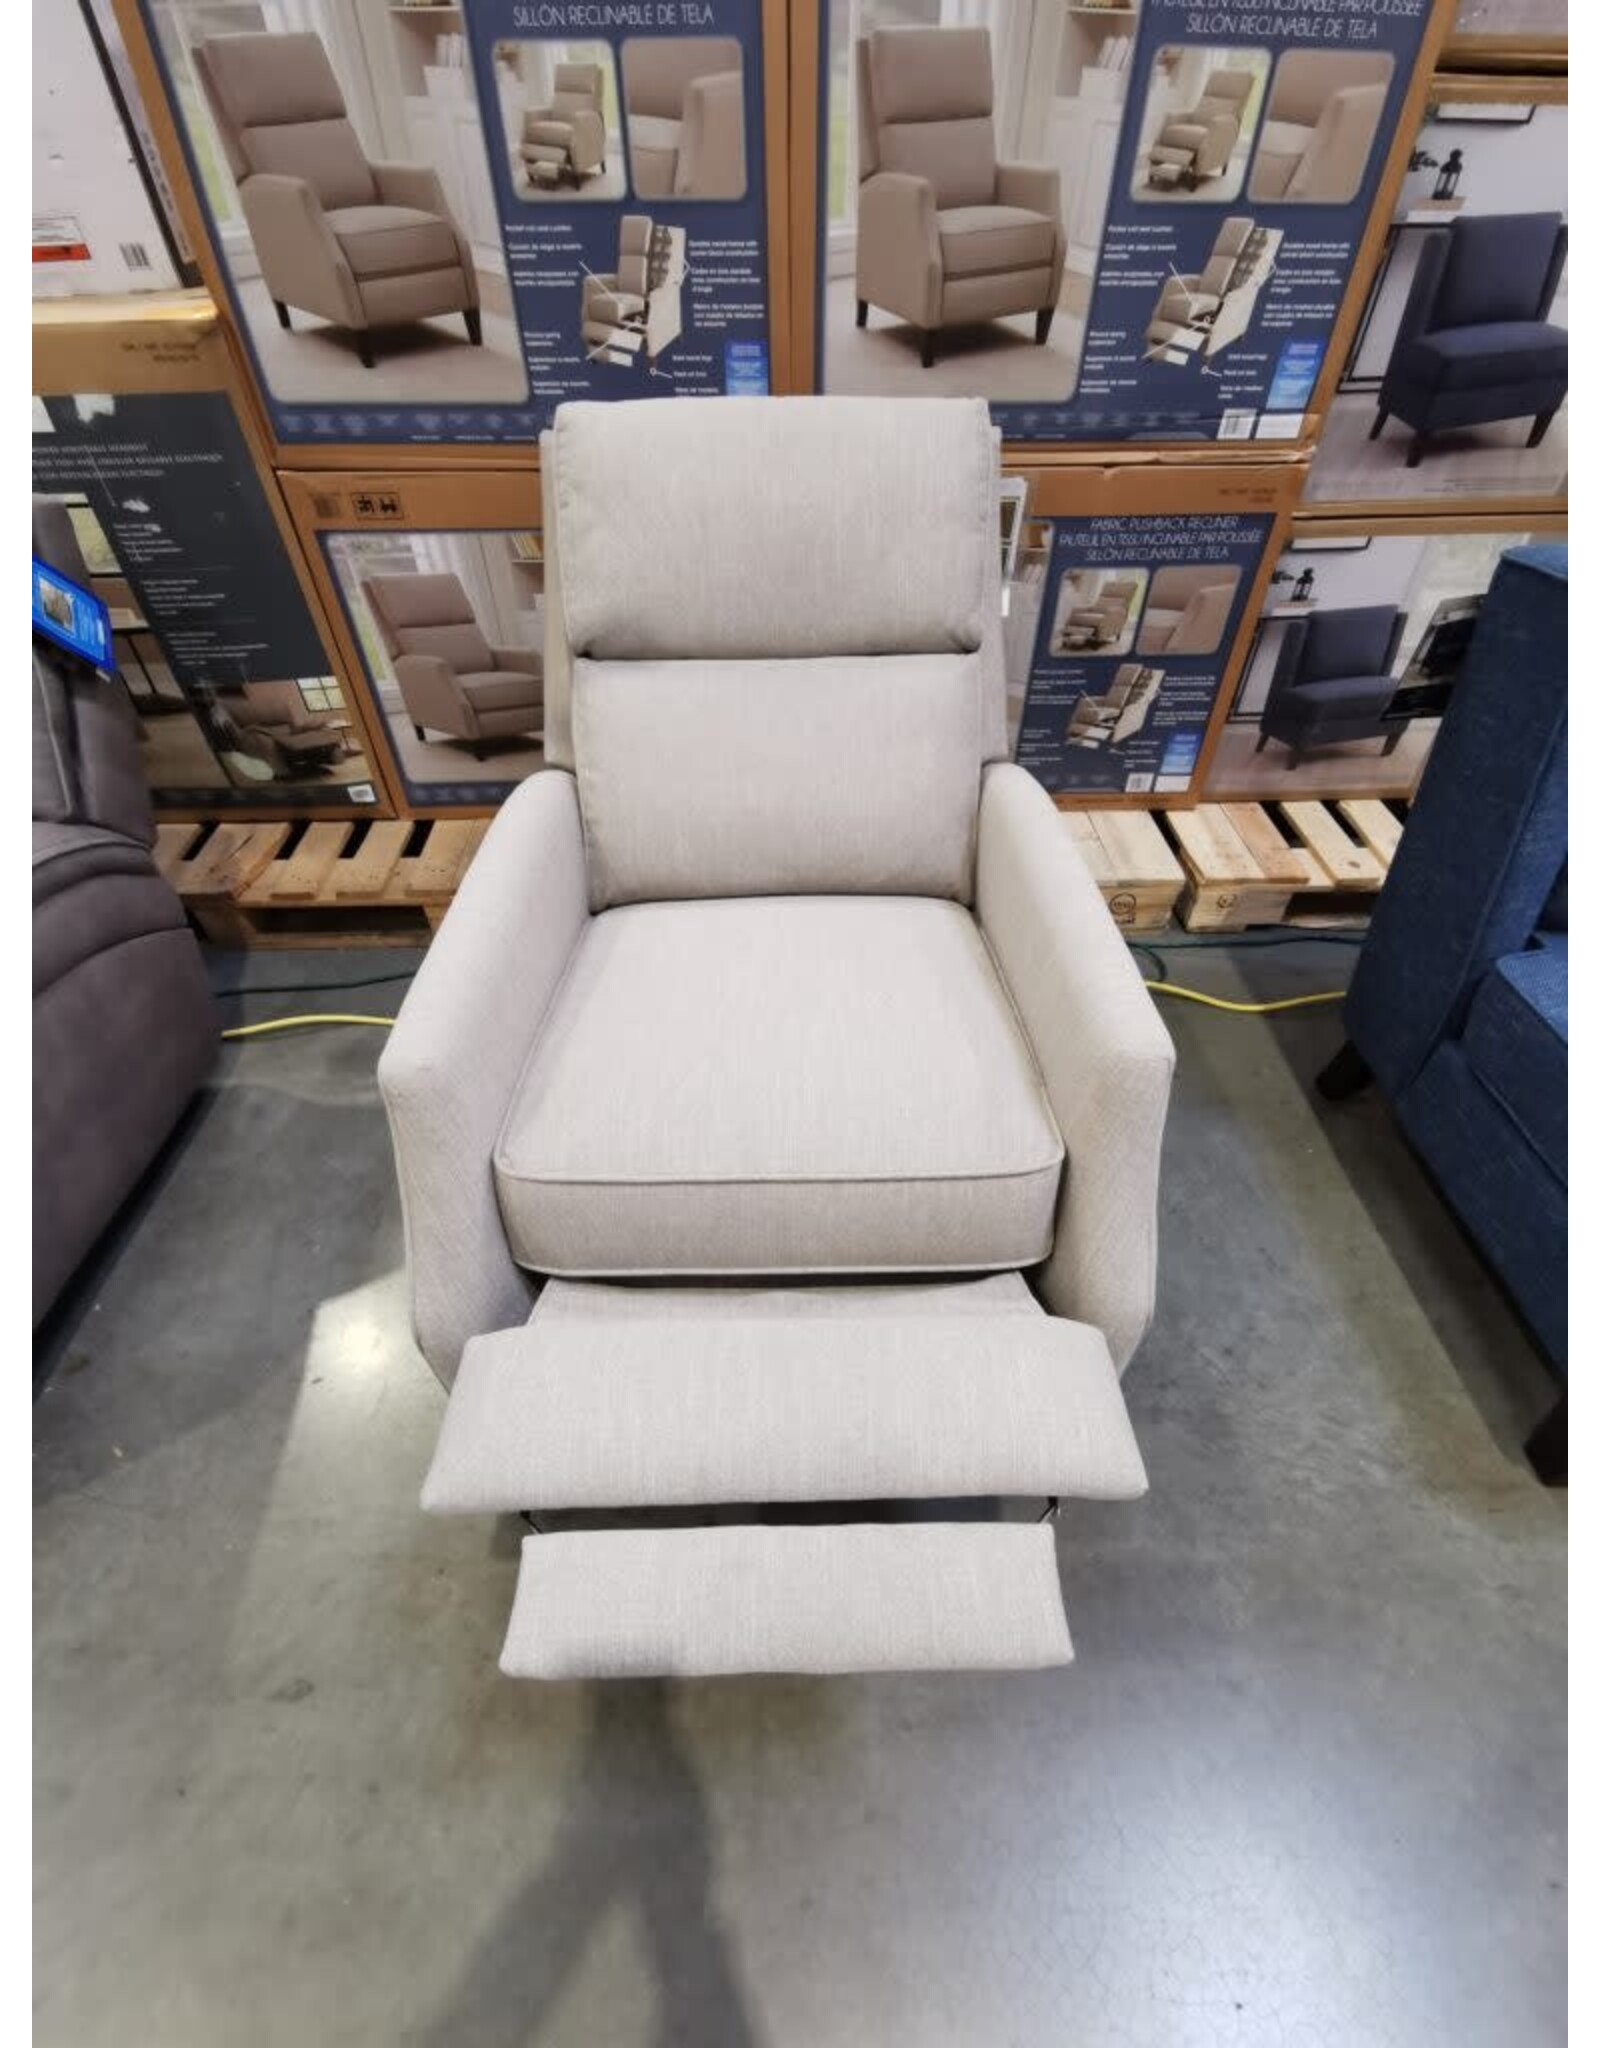 Sit back and relax in this reclining chair. Simply push back to recline, no levers or buttons required. With classic, clean limes, Synergy Home Tiegan Fabric Pushback Recliner makes it the perfect addition to any room.